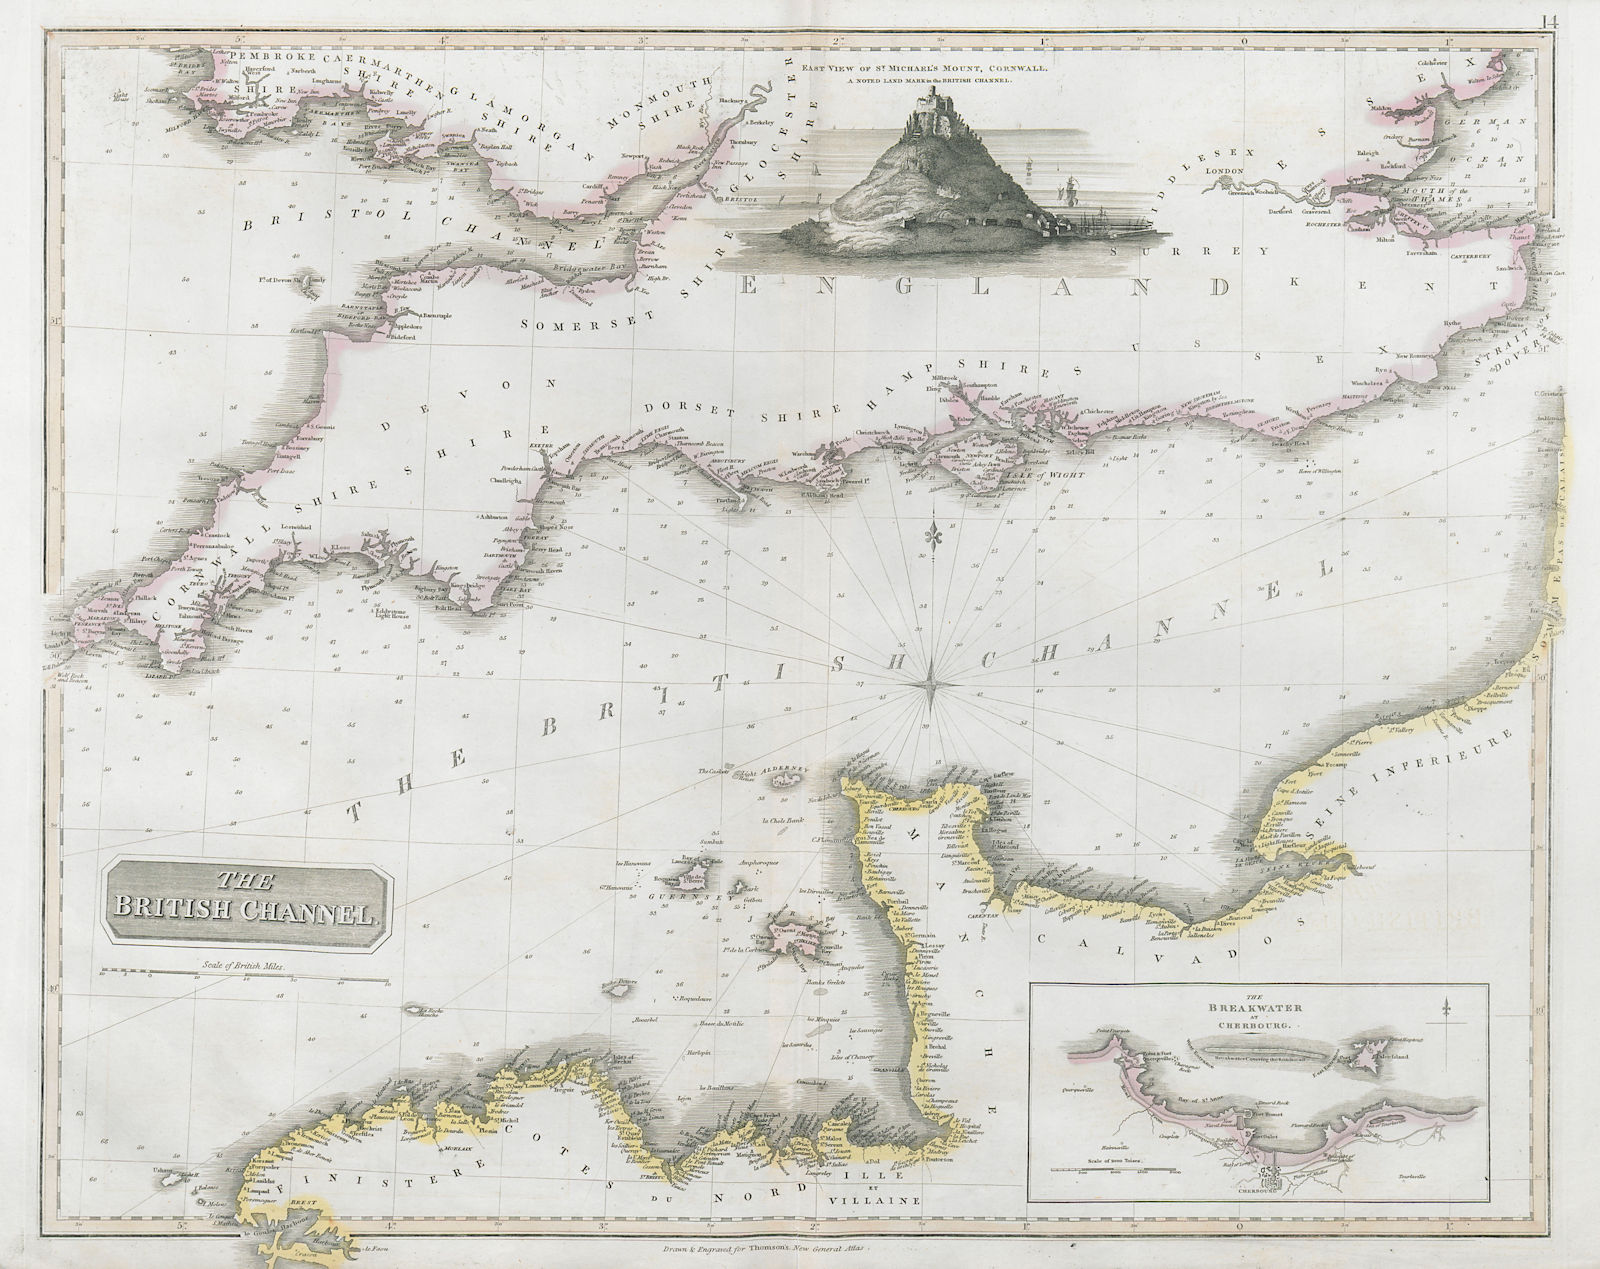 "The British Channel". English Channel. Manche. Cherbourgh. THOMSON 1830 map